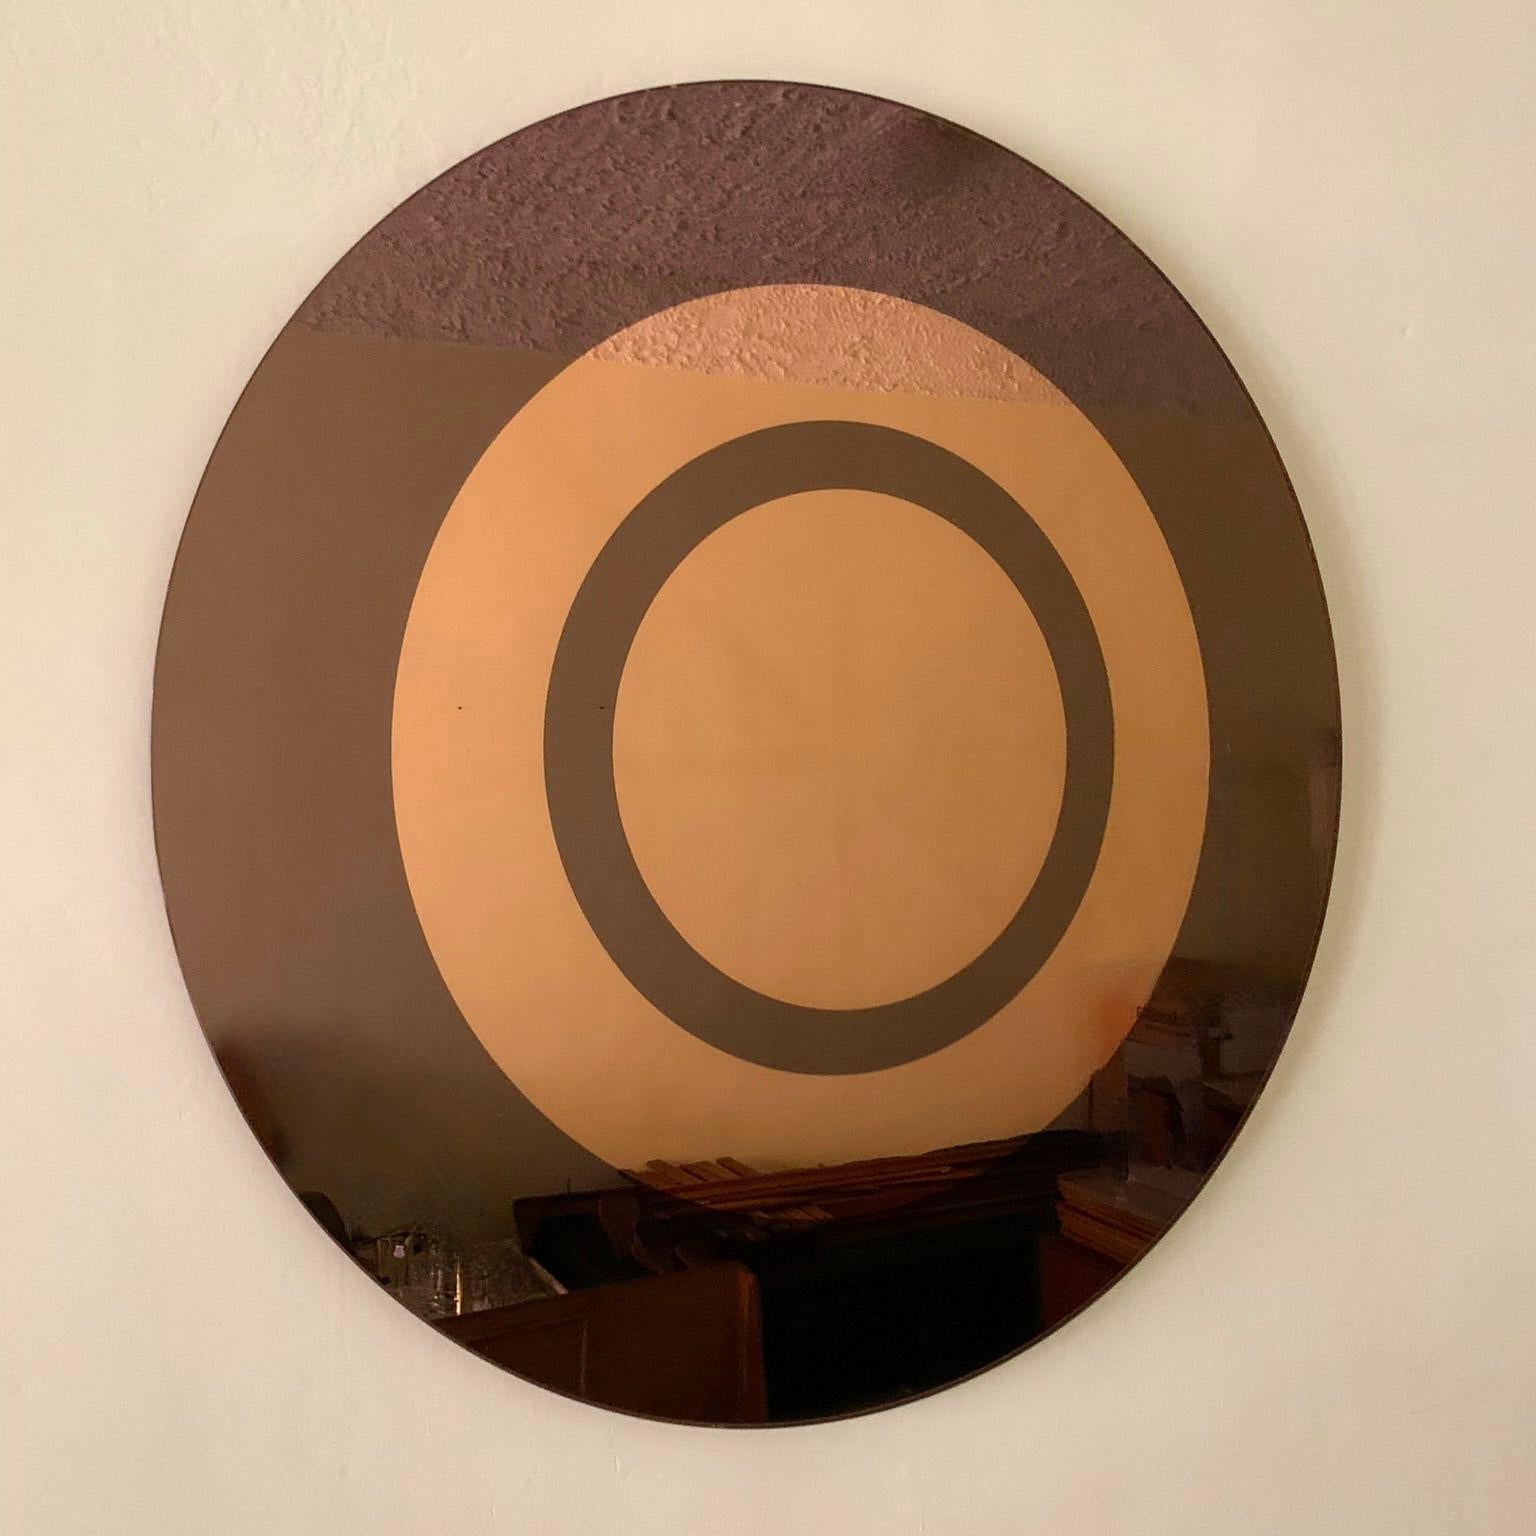 Round Circle Mirror Smoke and Gold Colored Glass by Cristal Art, Italy, 1970s For Sale 2